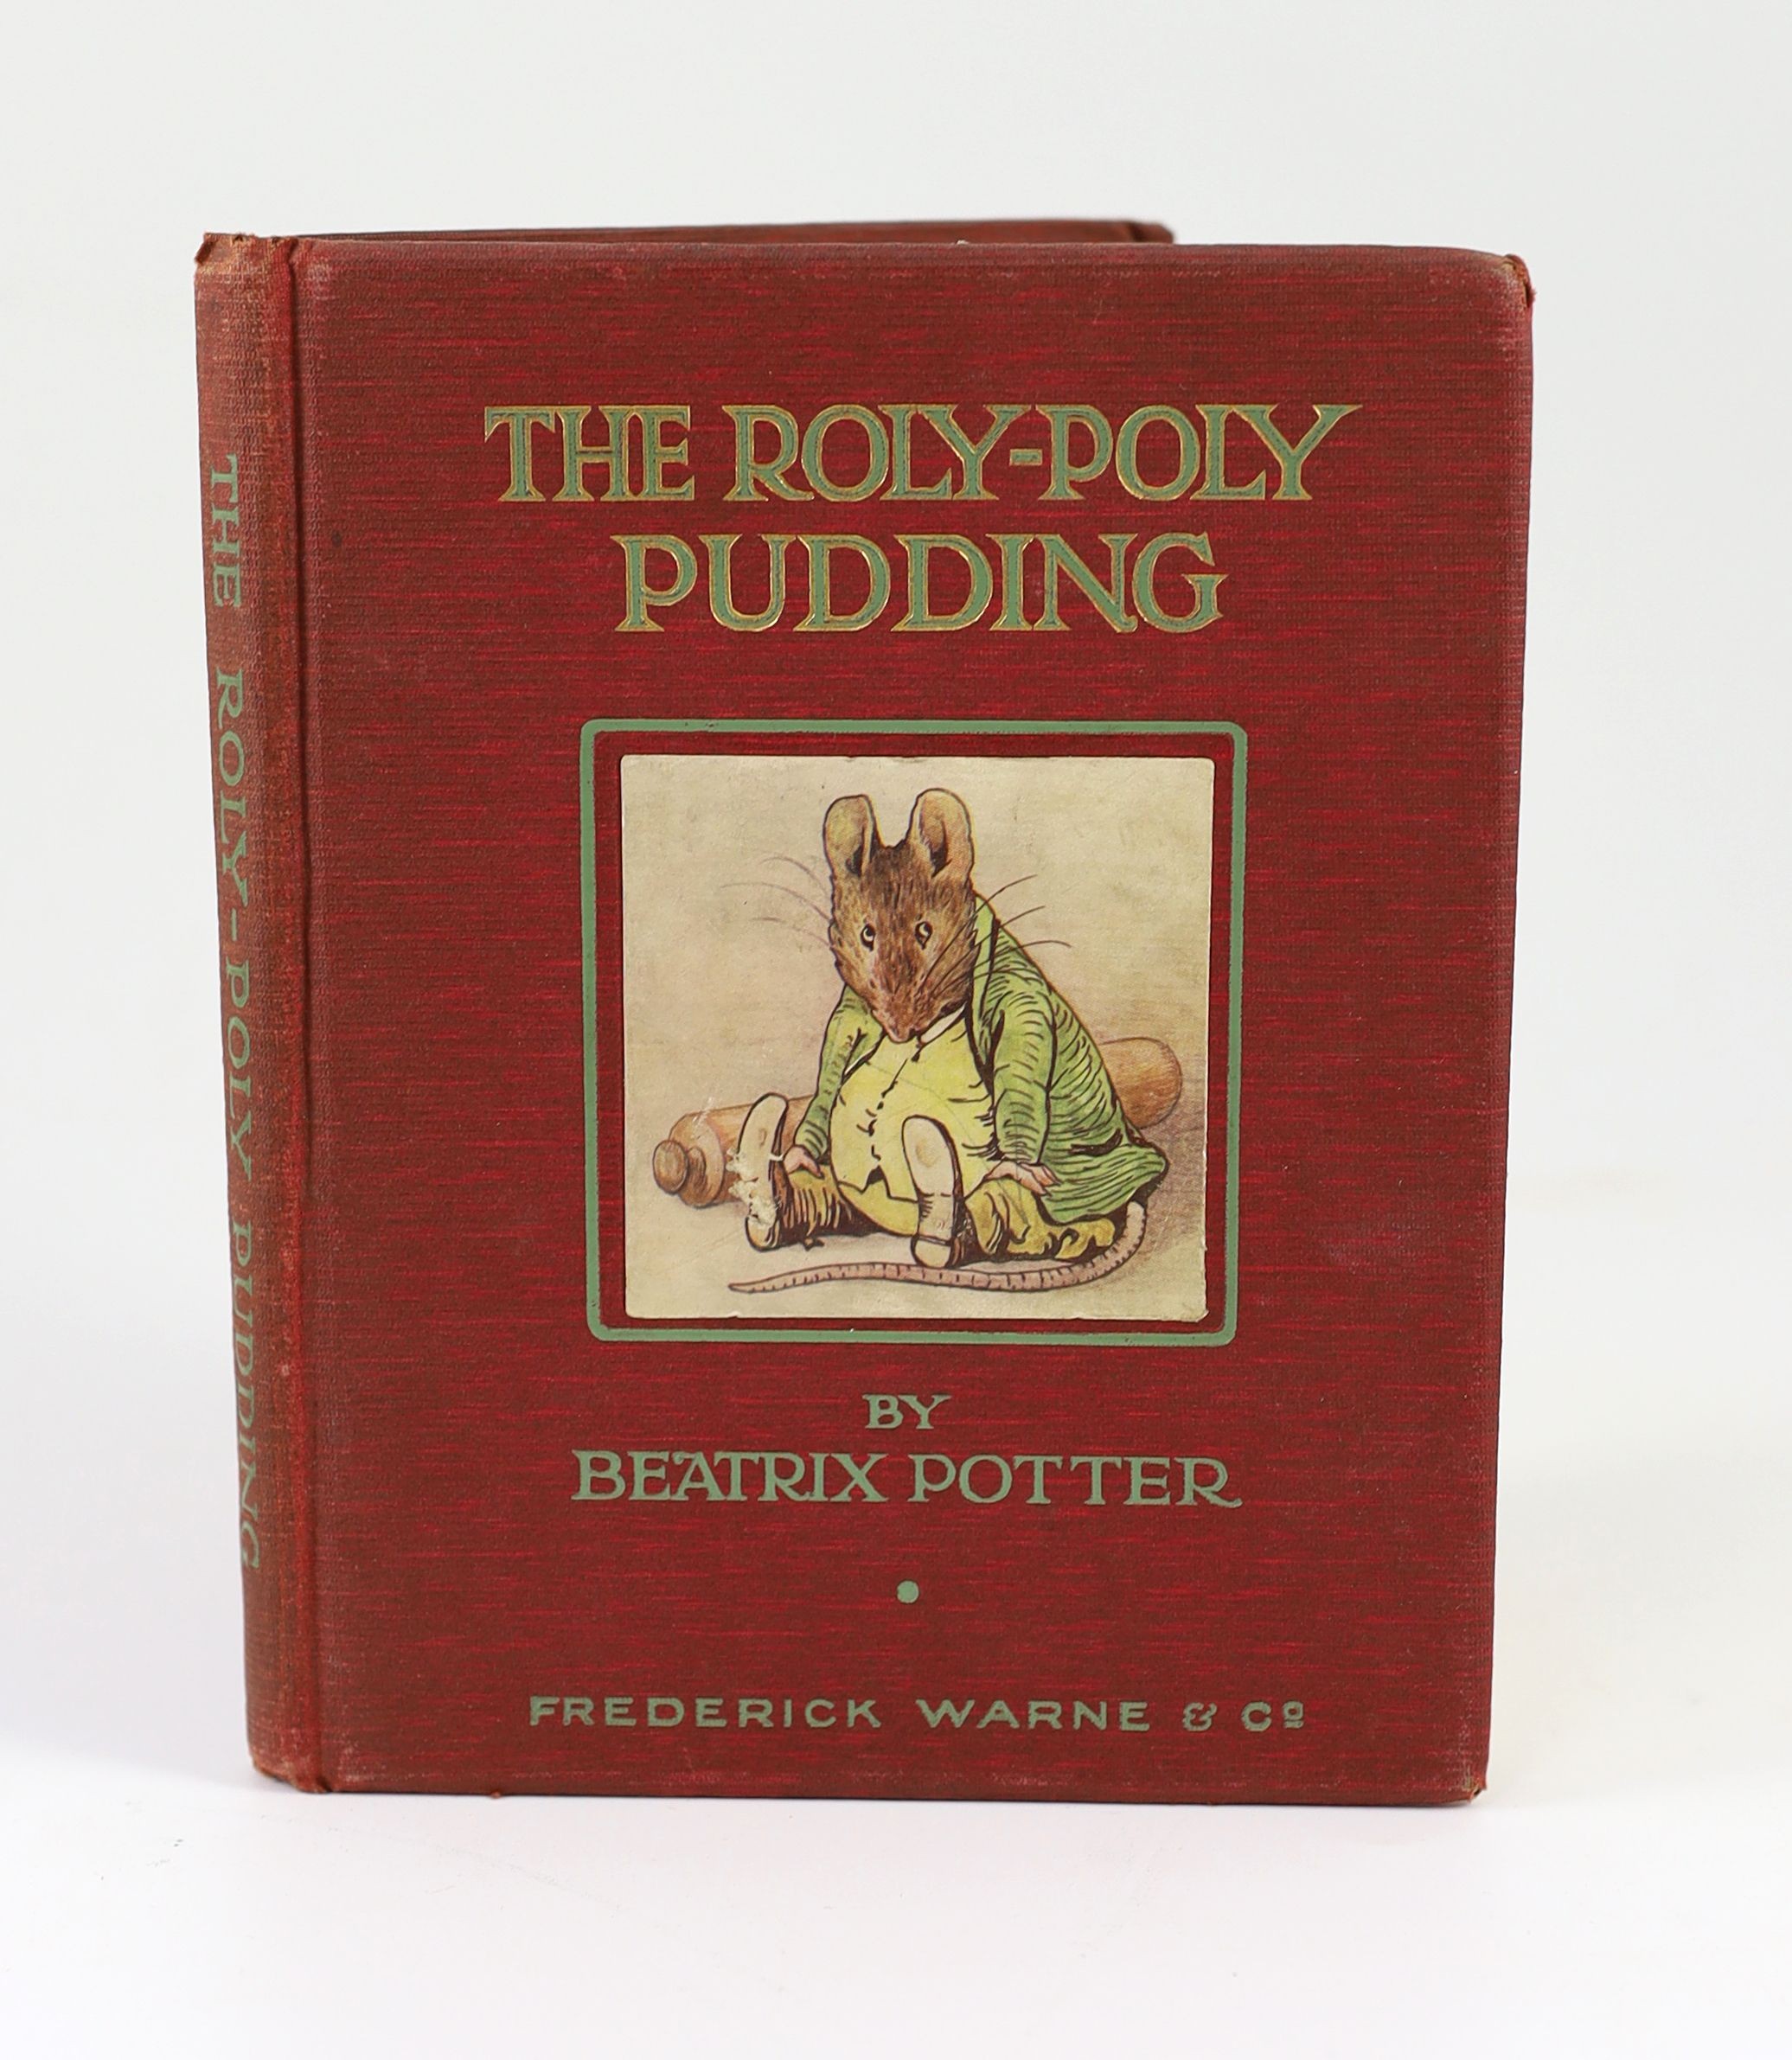 Potter, Beatrix - The Roly-Poly Pudding. First Edition (1st issue), coloured pictorial title, 18 full page coloured and num. text illus., half title; publisher's red cloth with coloured illus. mounted on upper board with